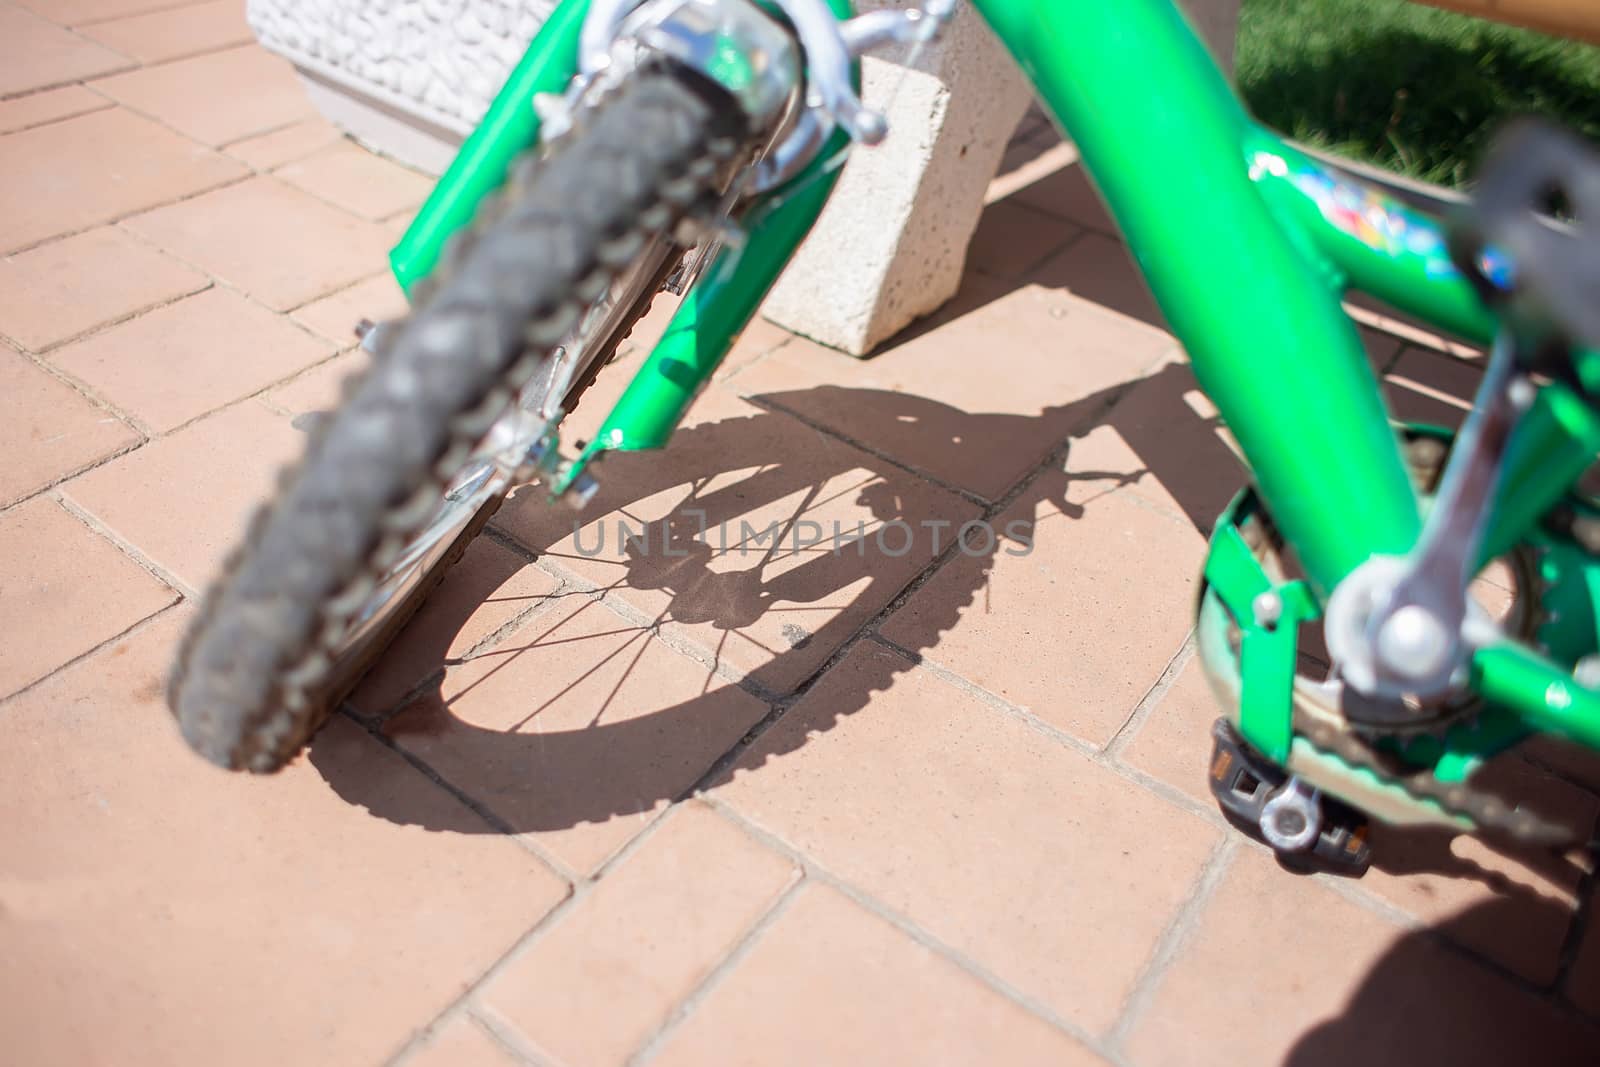 Children's bicycle wheel and its shadow on the paving stones. Carved shadow from the spokes of a bicycle wheel.